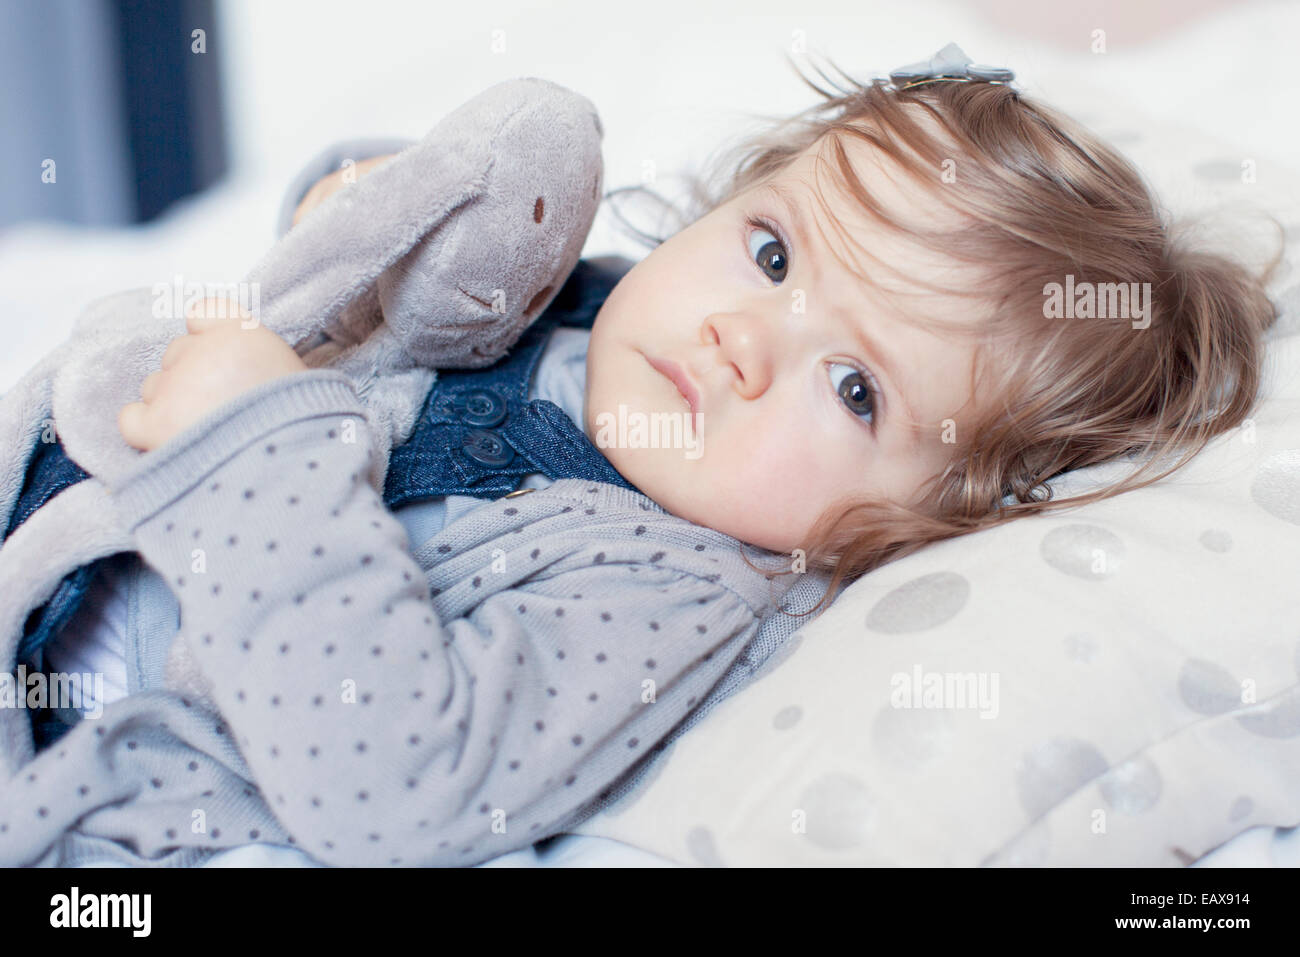 Baby girl lying down with stuffed toy, portrait Stock Photo